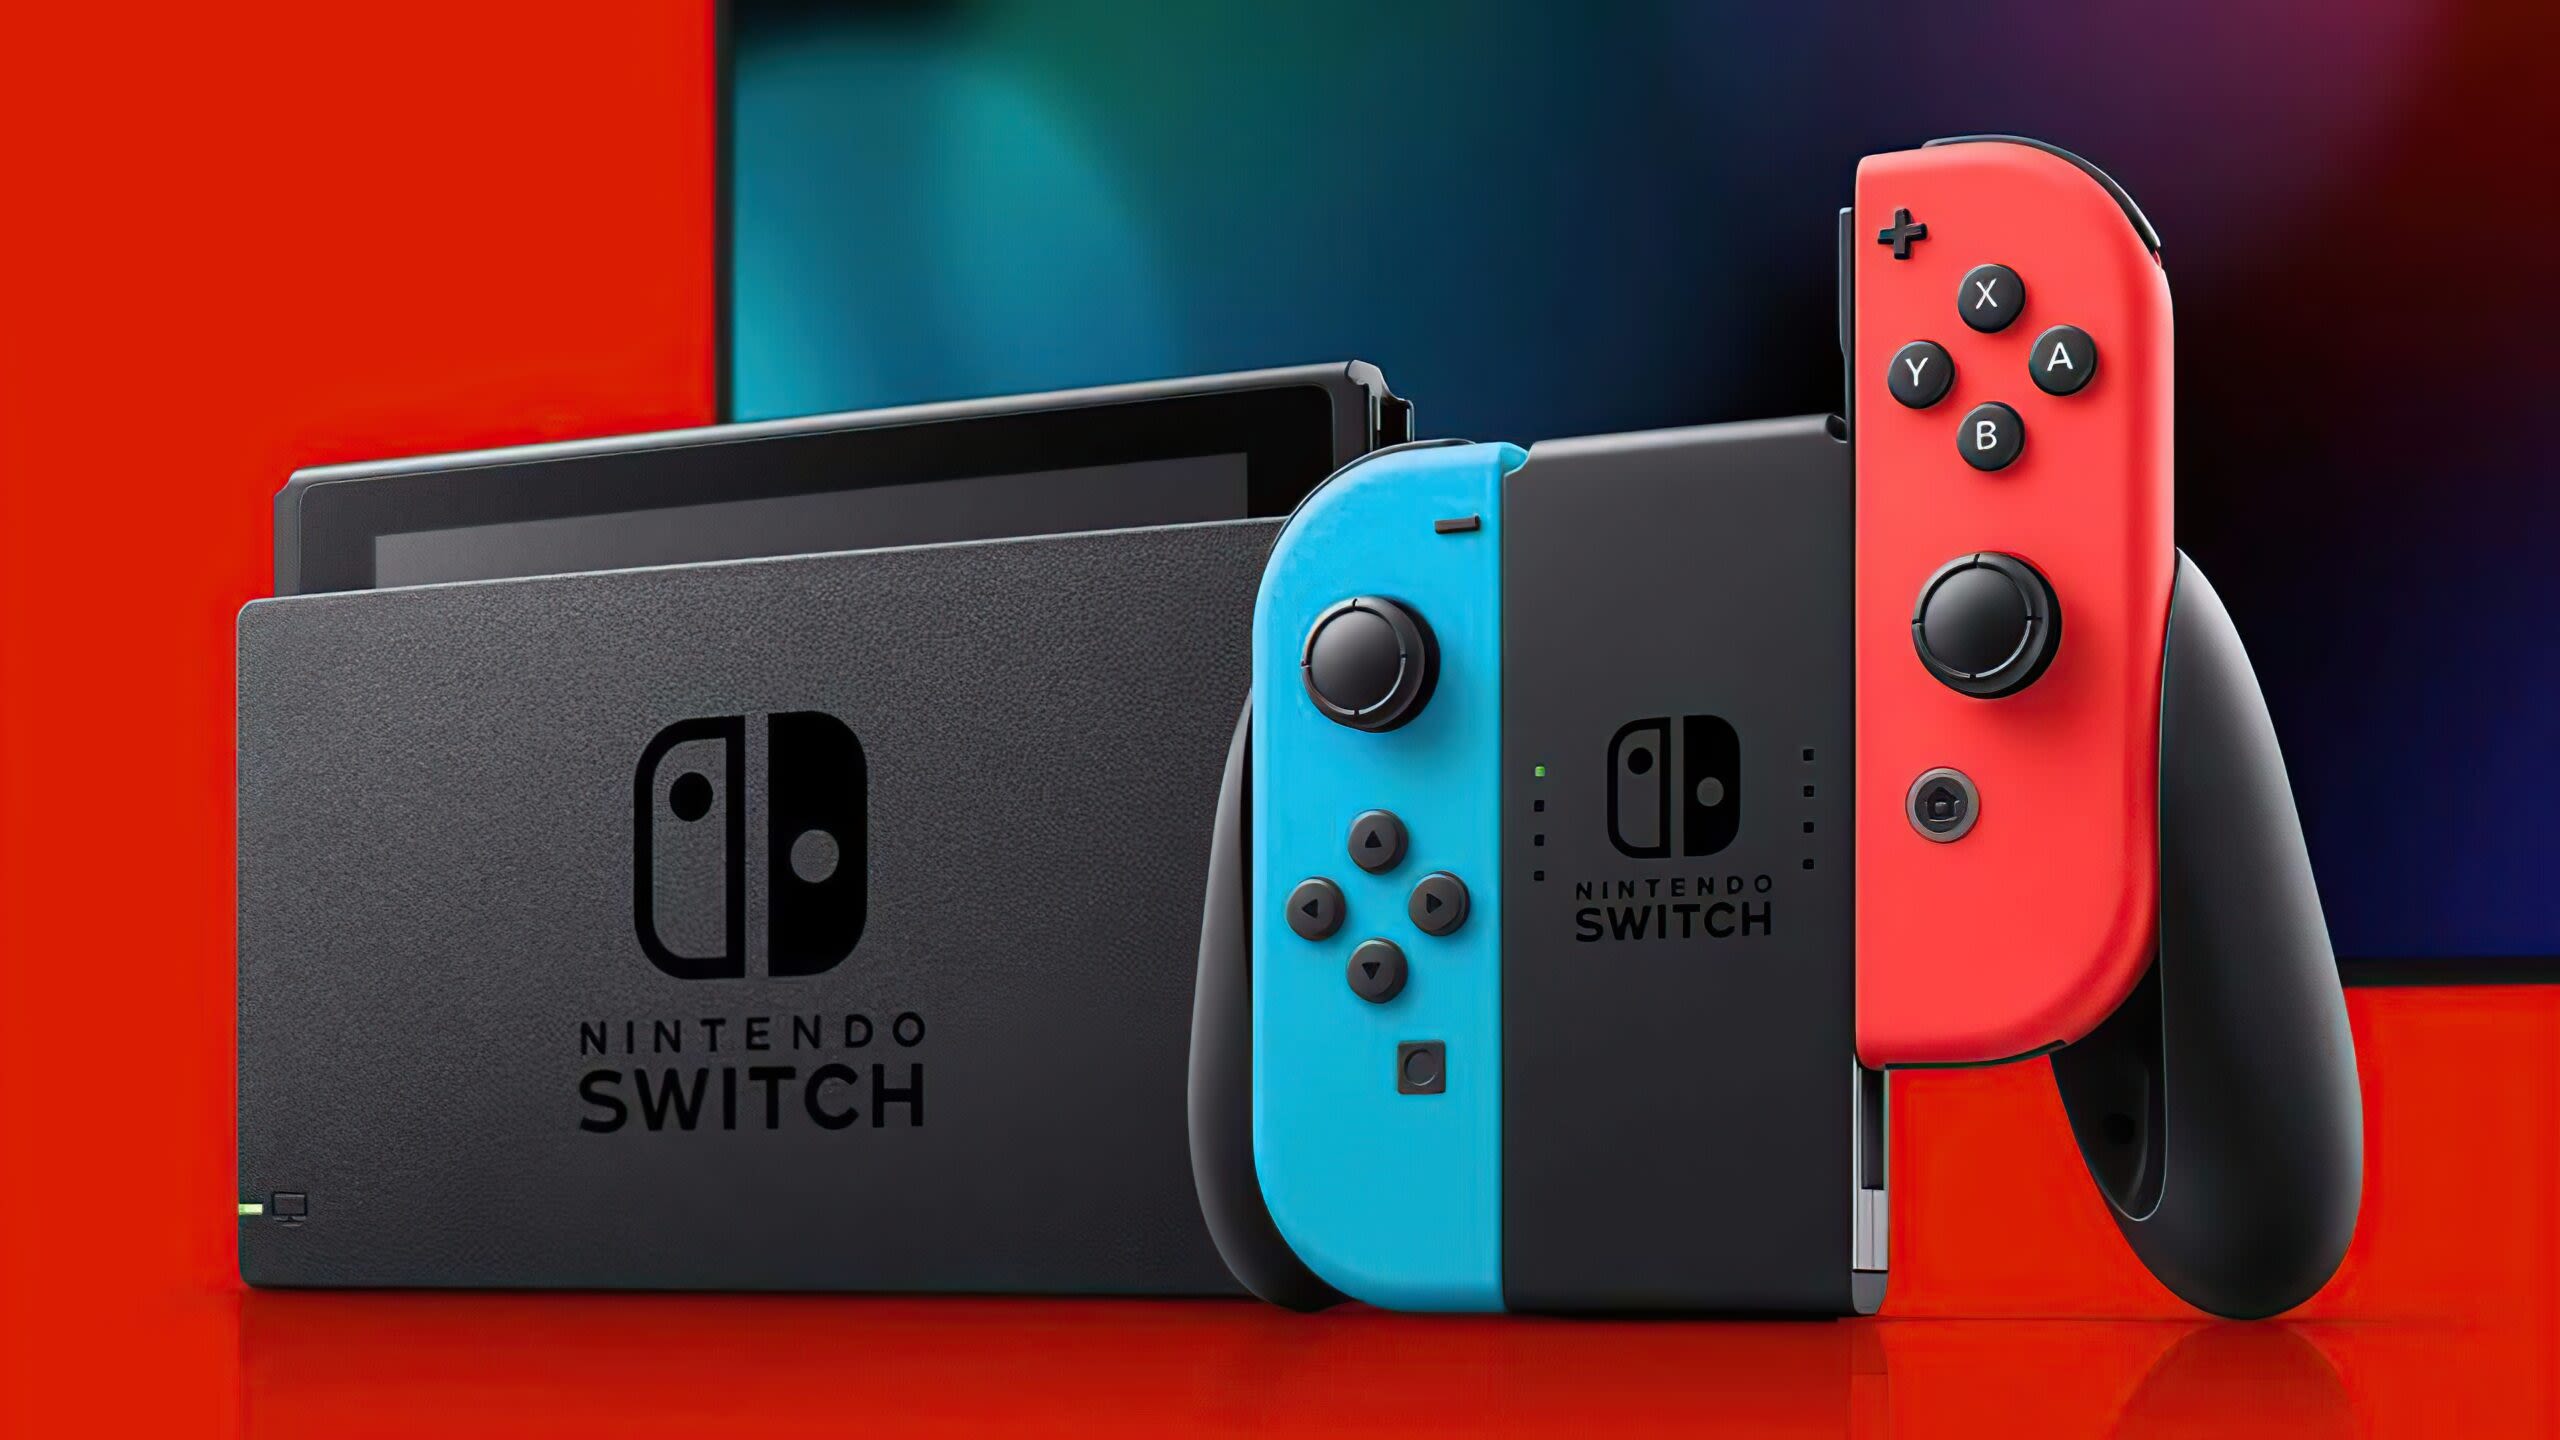 Nintendo Switch 2 May Only Deliver 4K, 30 FPS With NVIDIA DLSS, but It Would Be A "Misuse" of the Upscaler